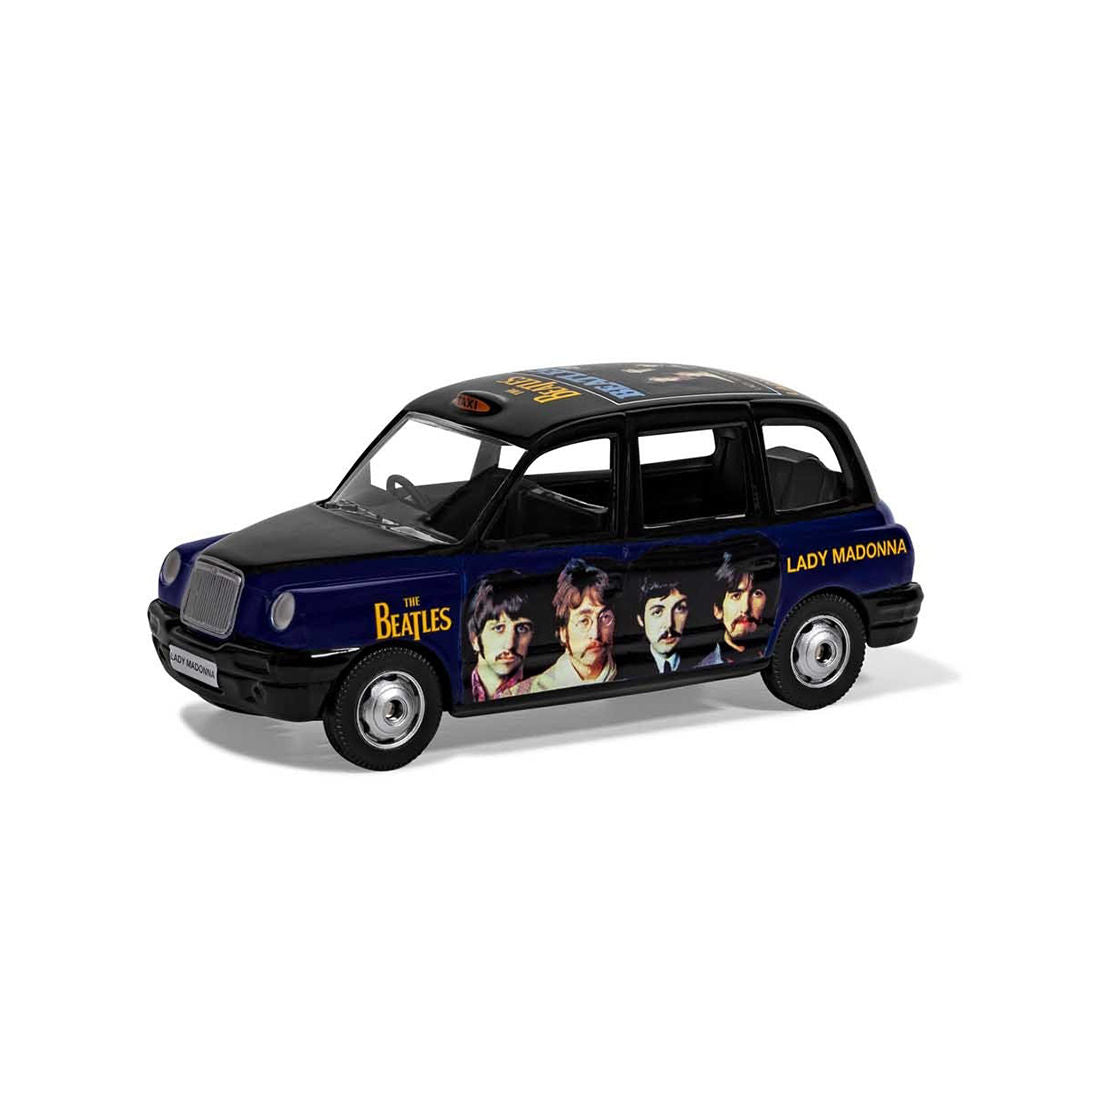 The Beatles - The Beatles - London Taxi - Lady Madonna